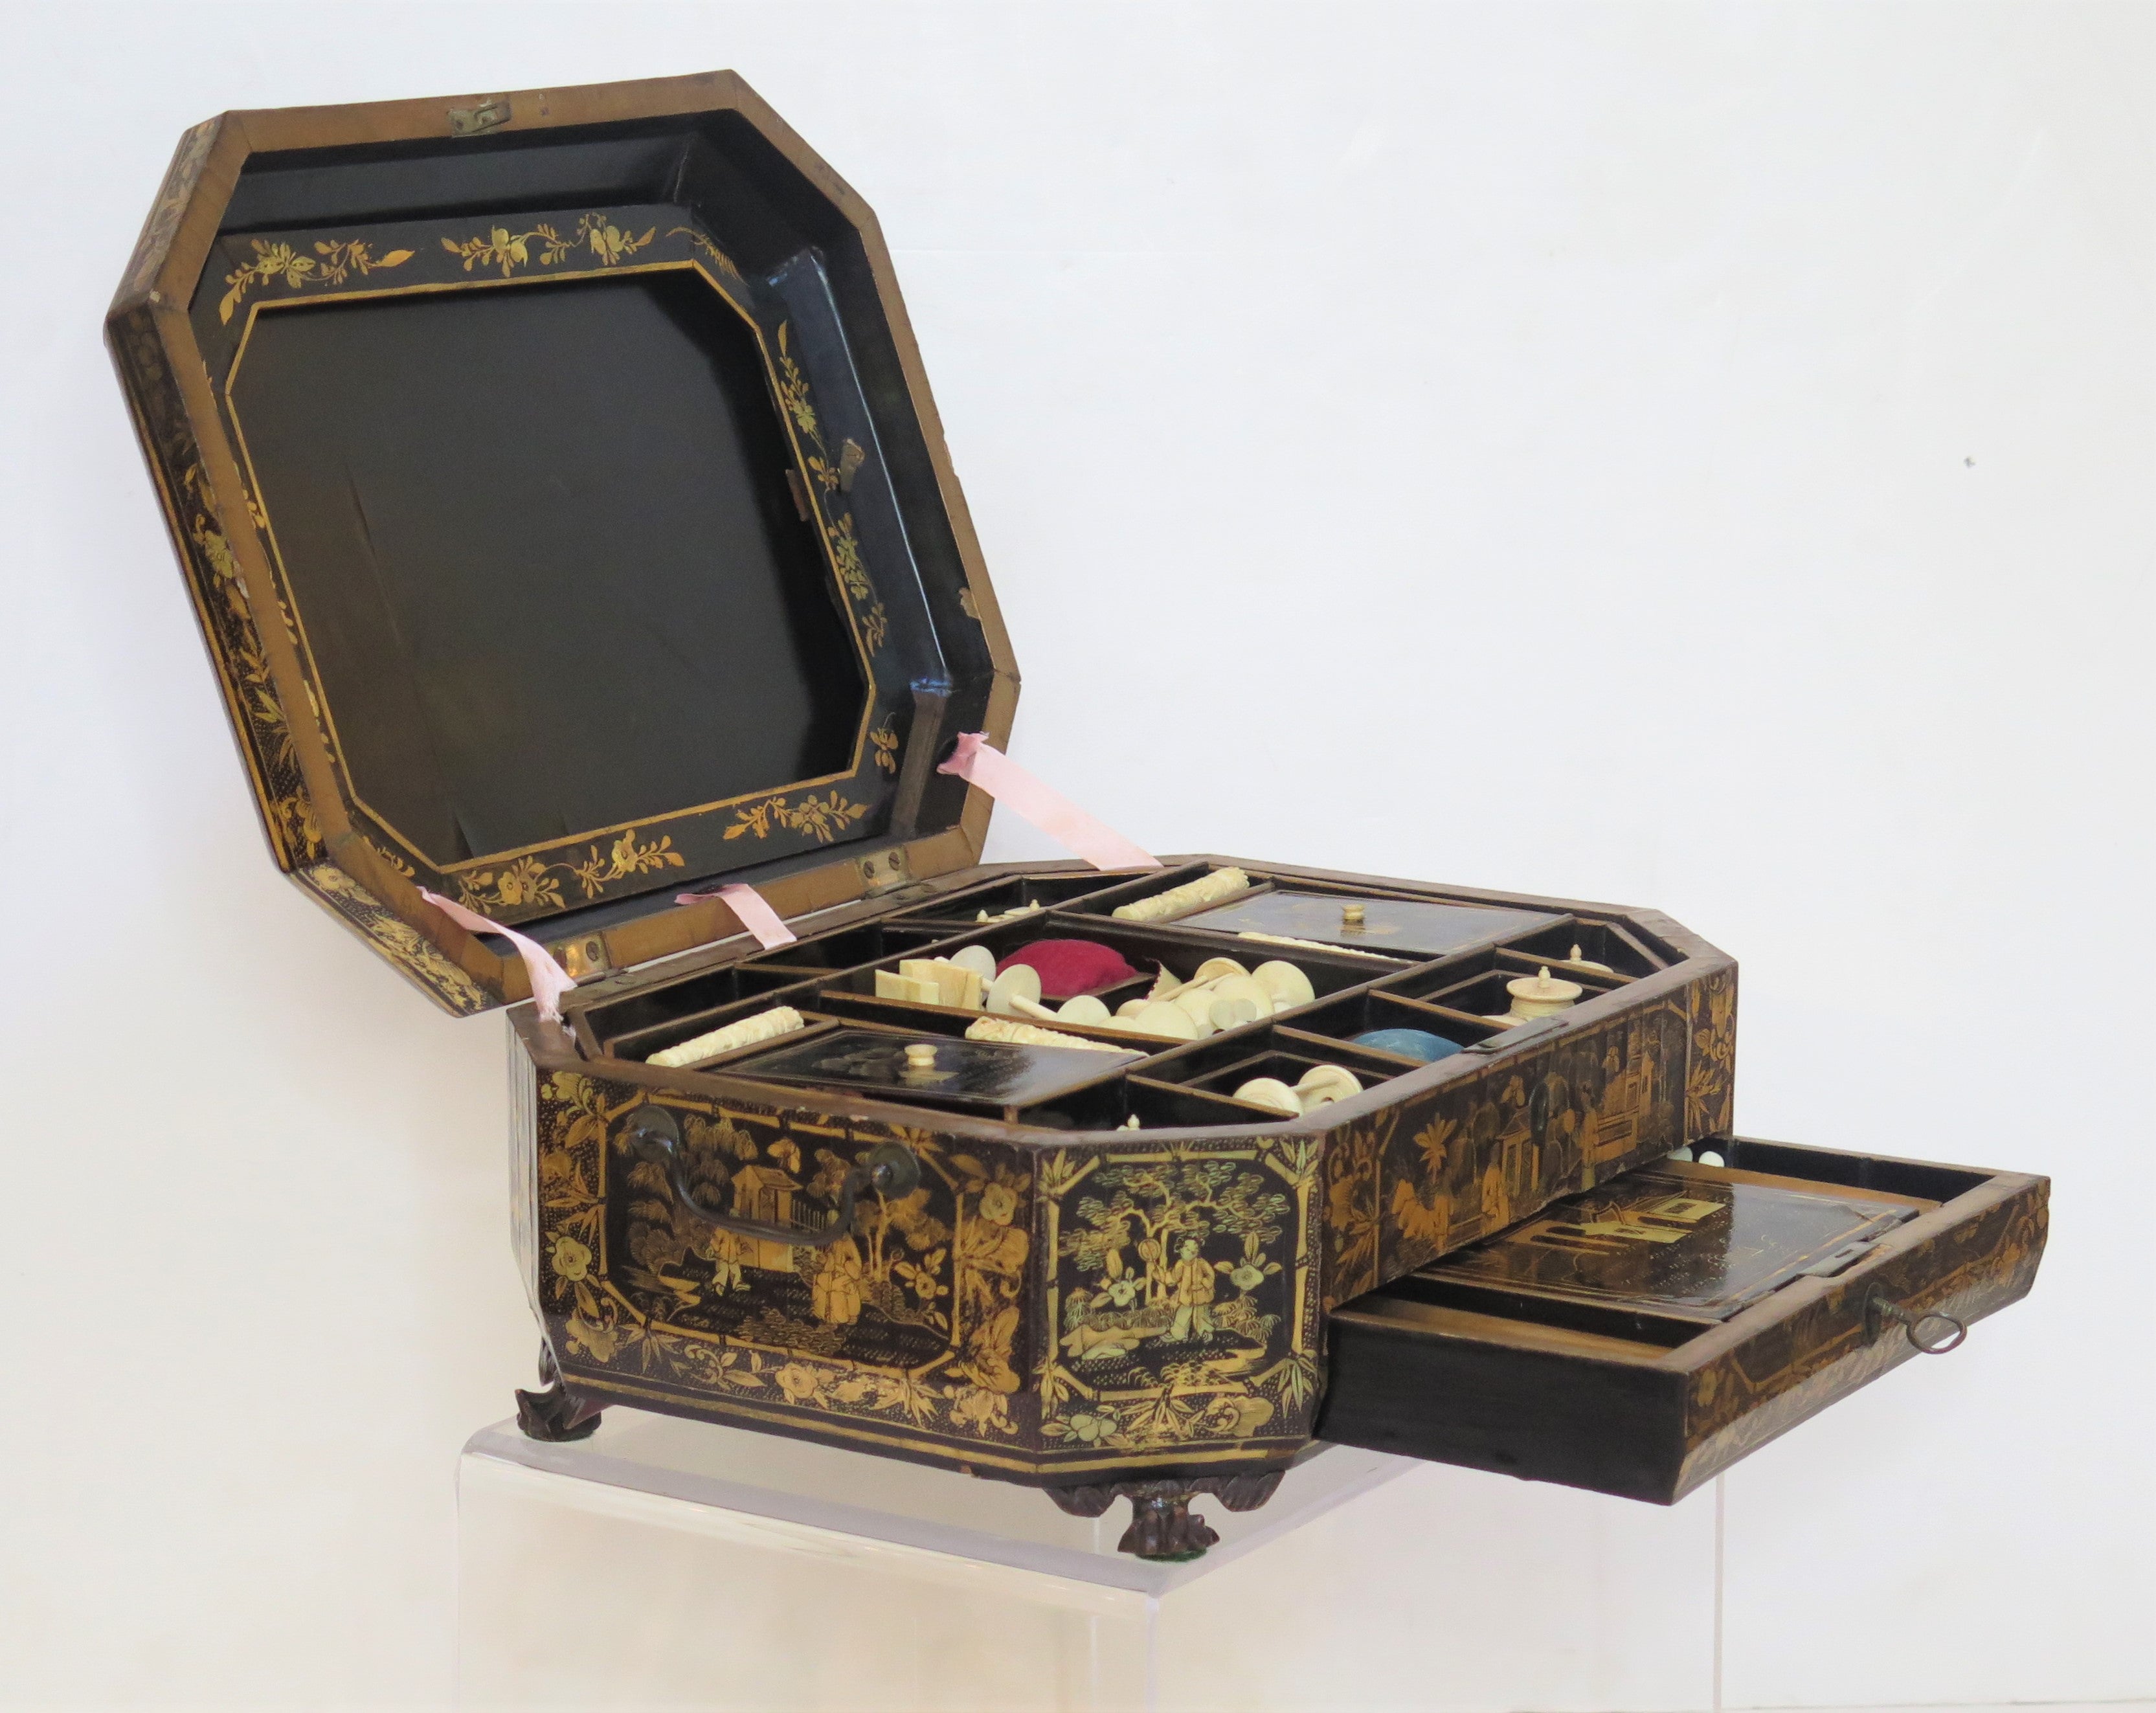 Lot - Pair Chinese Export Lacquerware Sewing Boxes (2pcs)